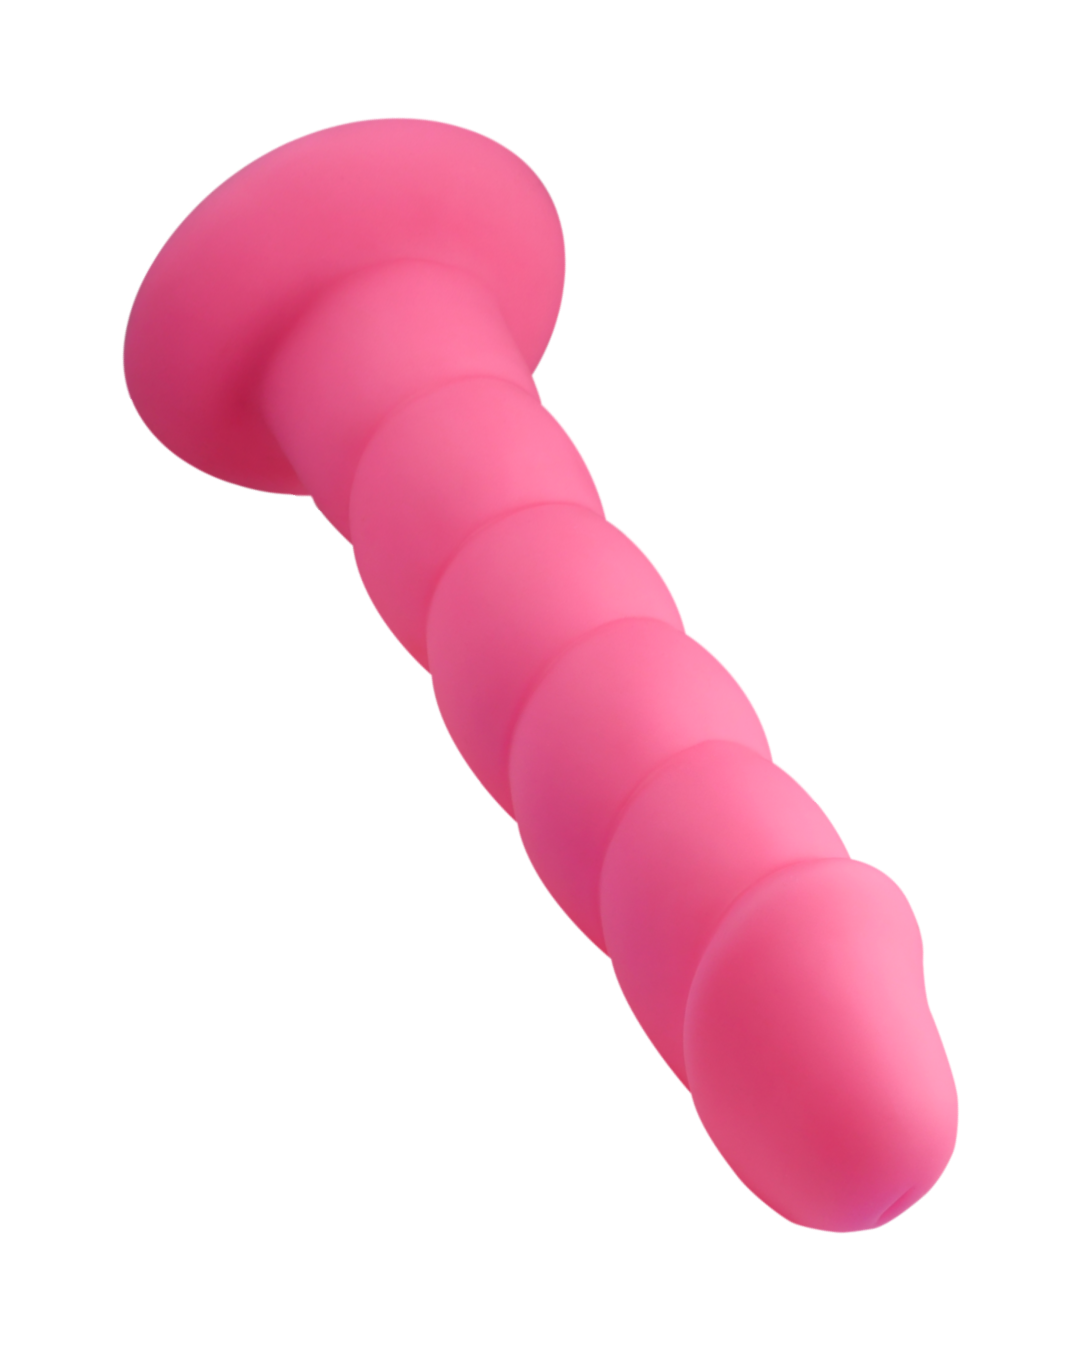 Suga Daddy 9.5 Inch Swirled Pink Silicone Dildo close up of tip